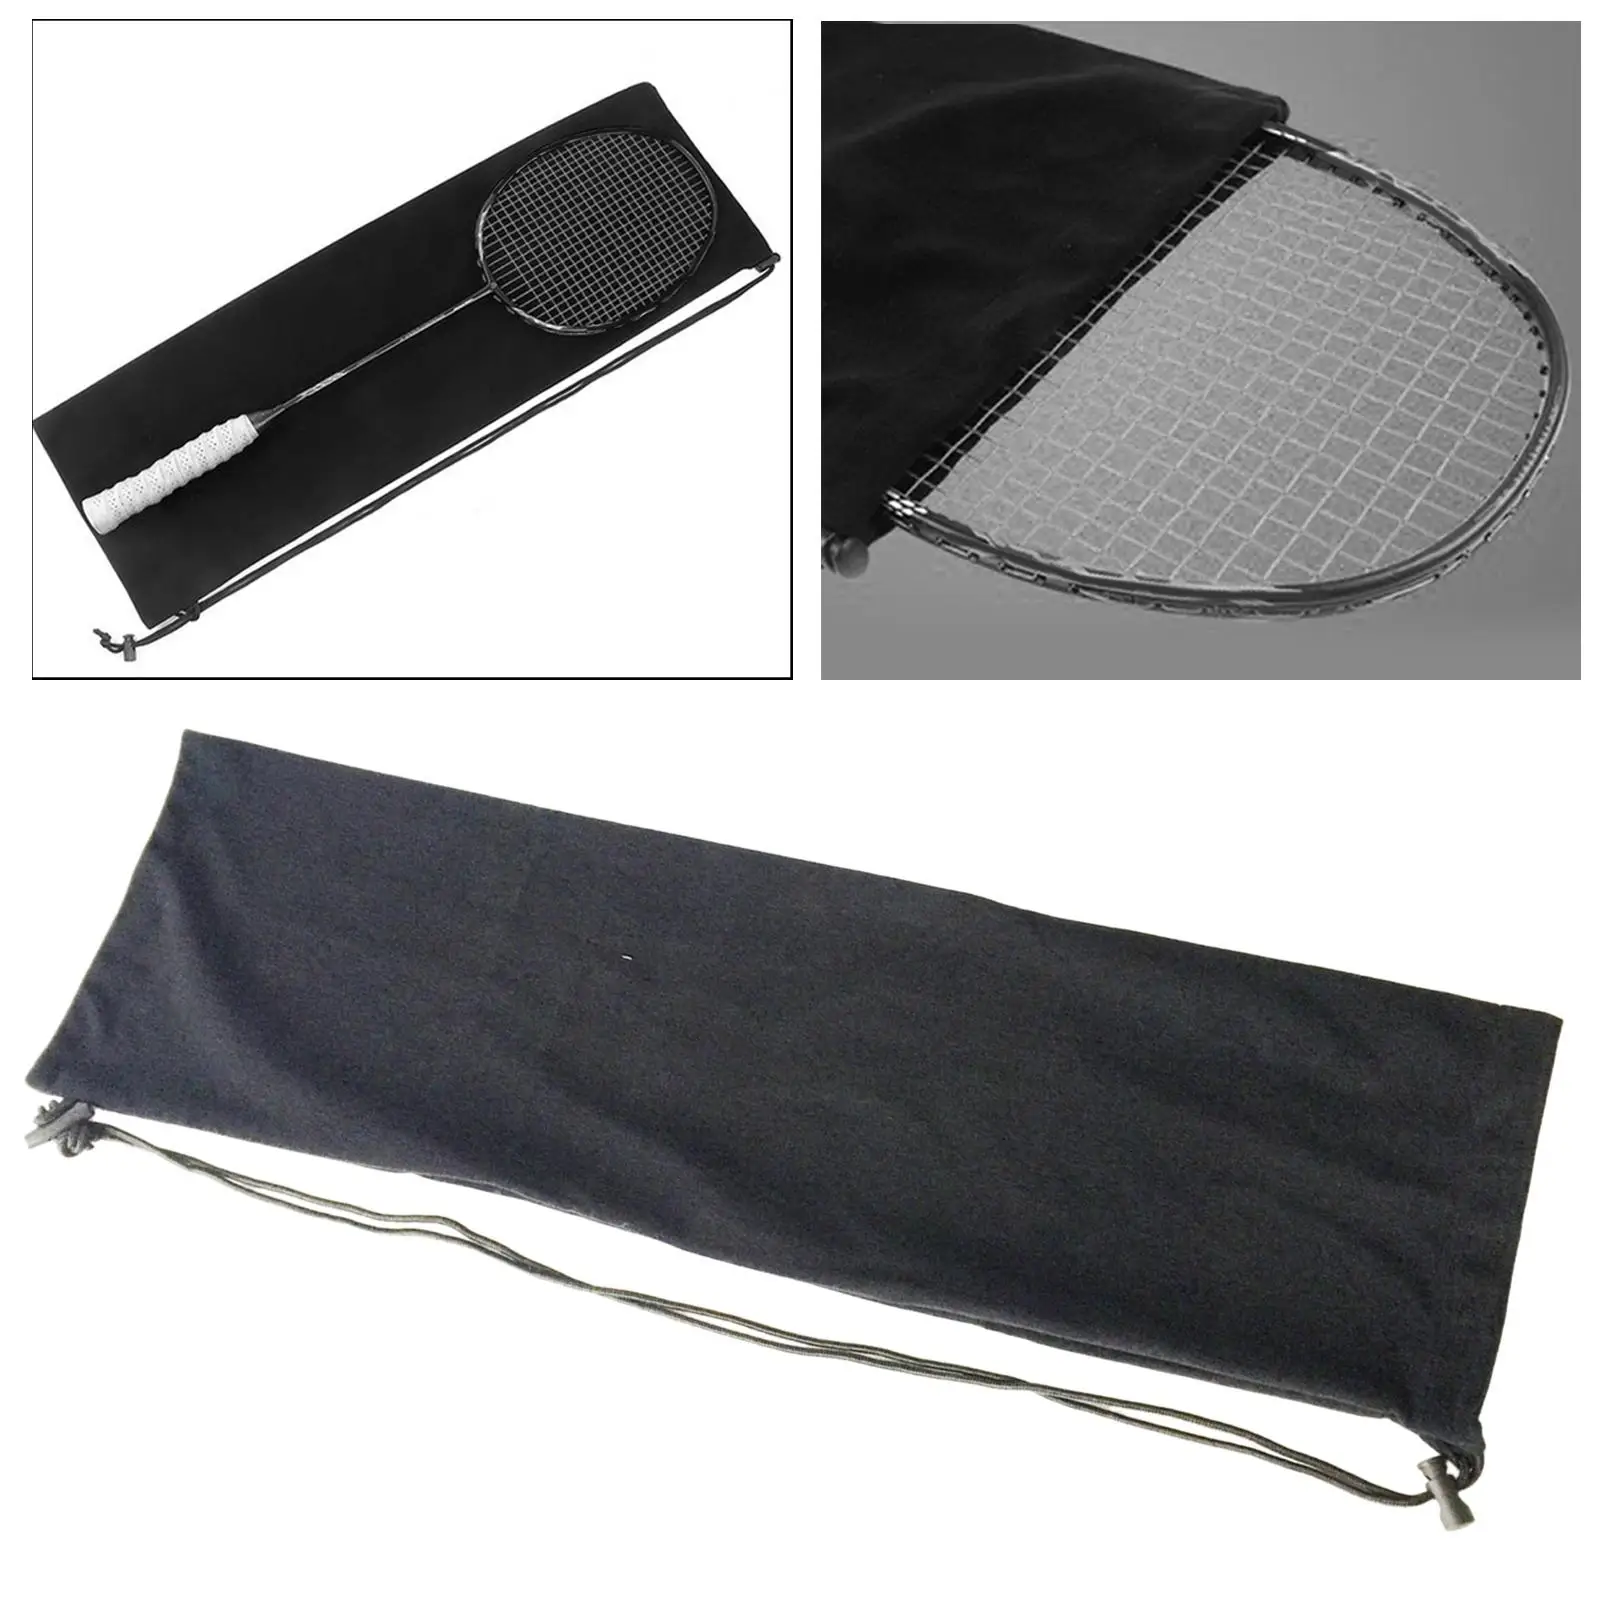 Badminton Racket Cover Bag Drawstring Bag Protective Carry Case Soft Dustproof Pouch for Beginner Players Outdoor Sports Unisex